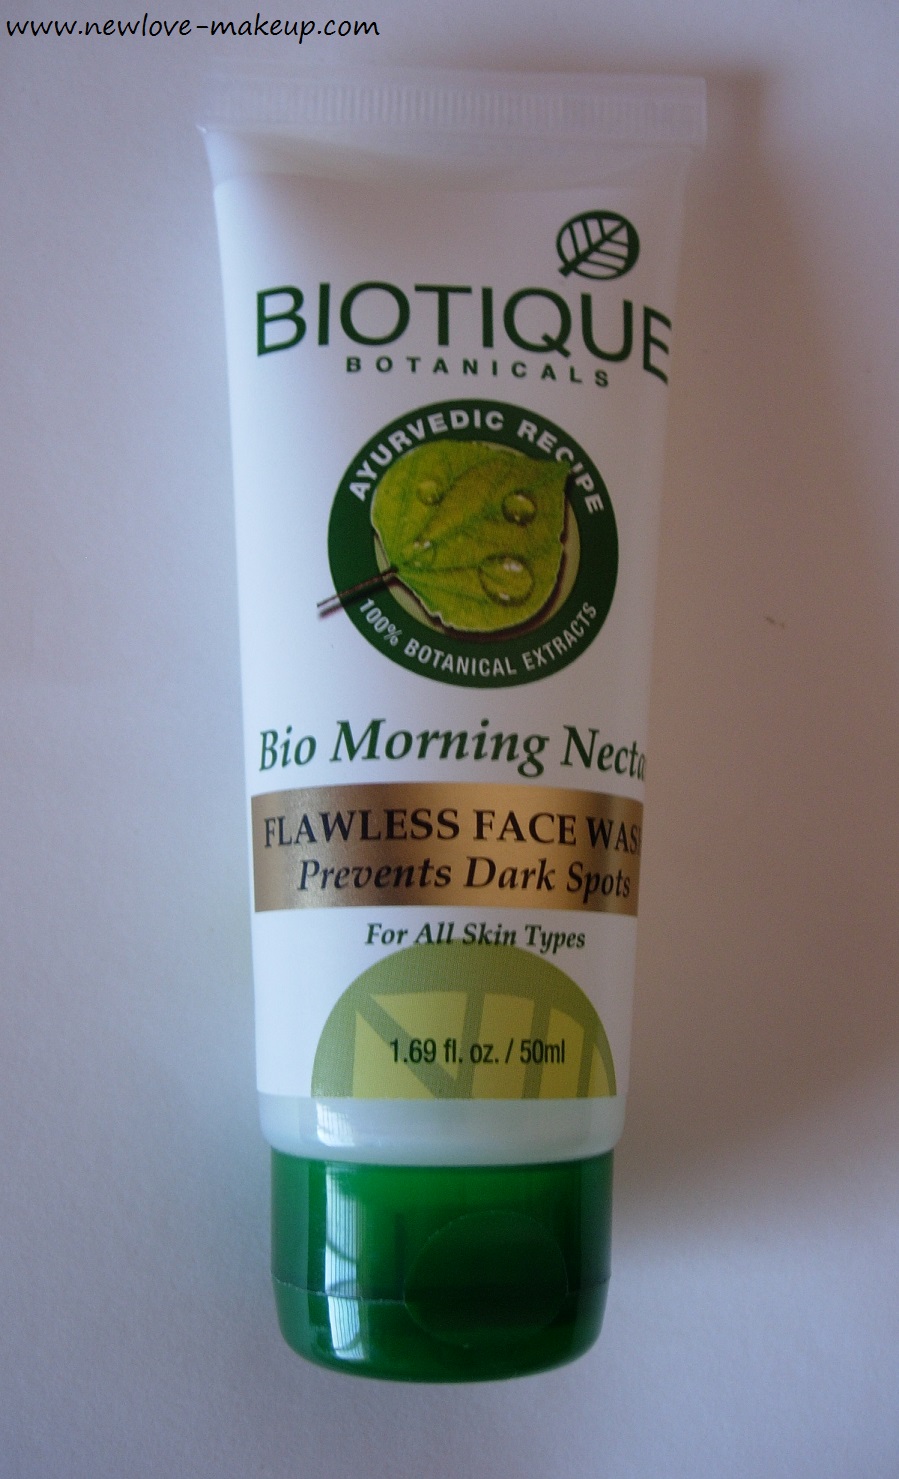 Biotique Bio Morning Nectar Flawless Face Wash Review - New Love - Makeup